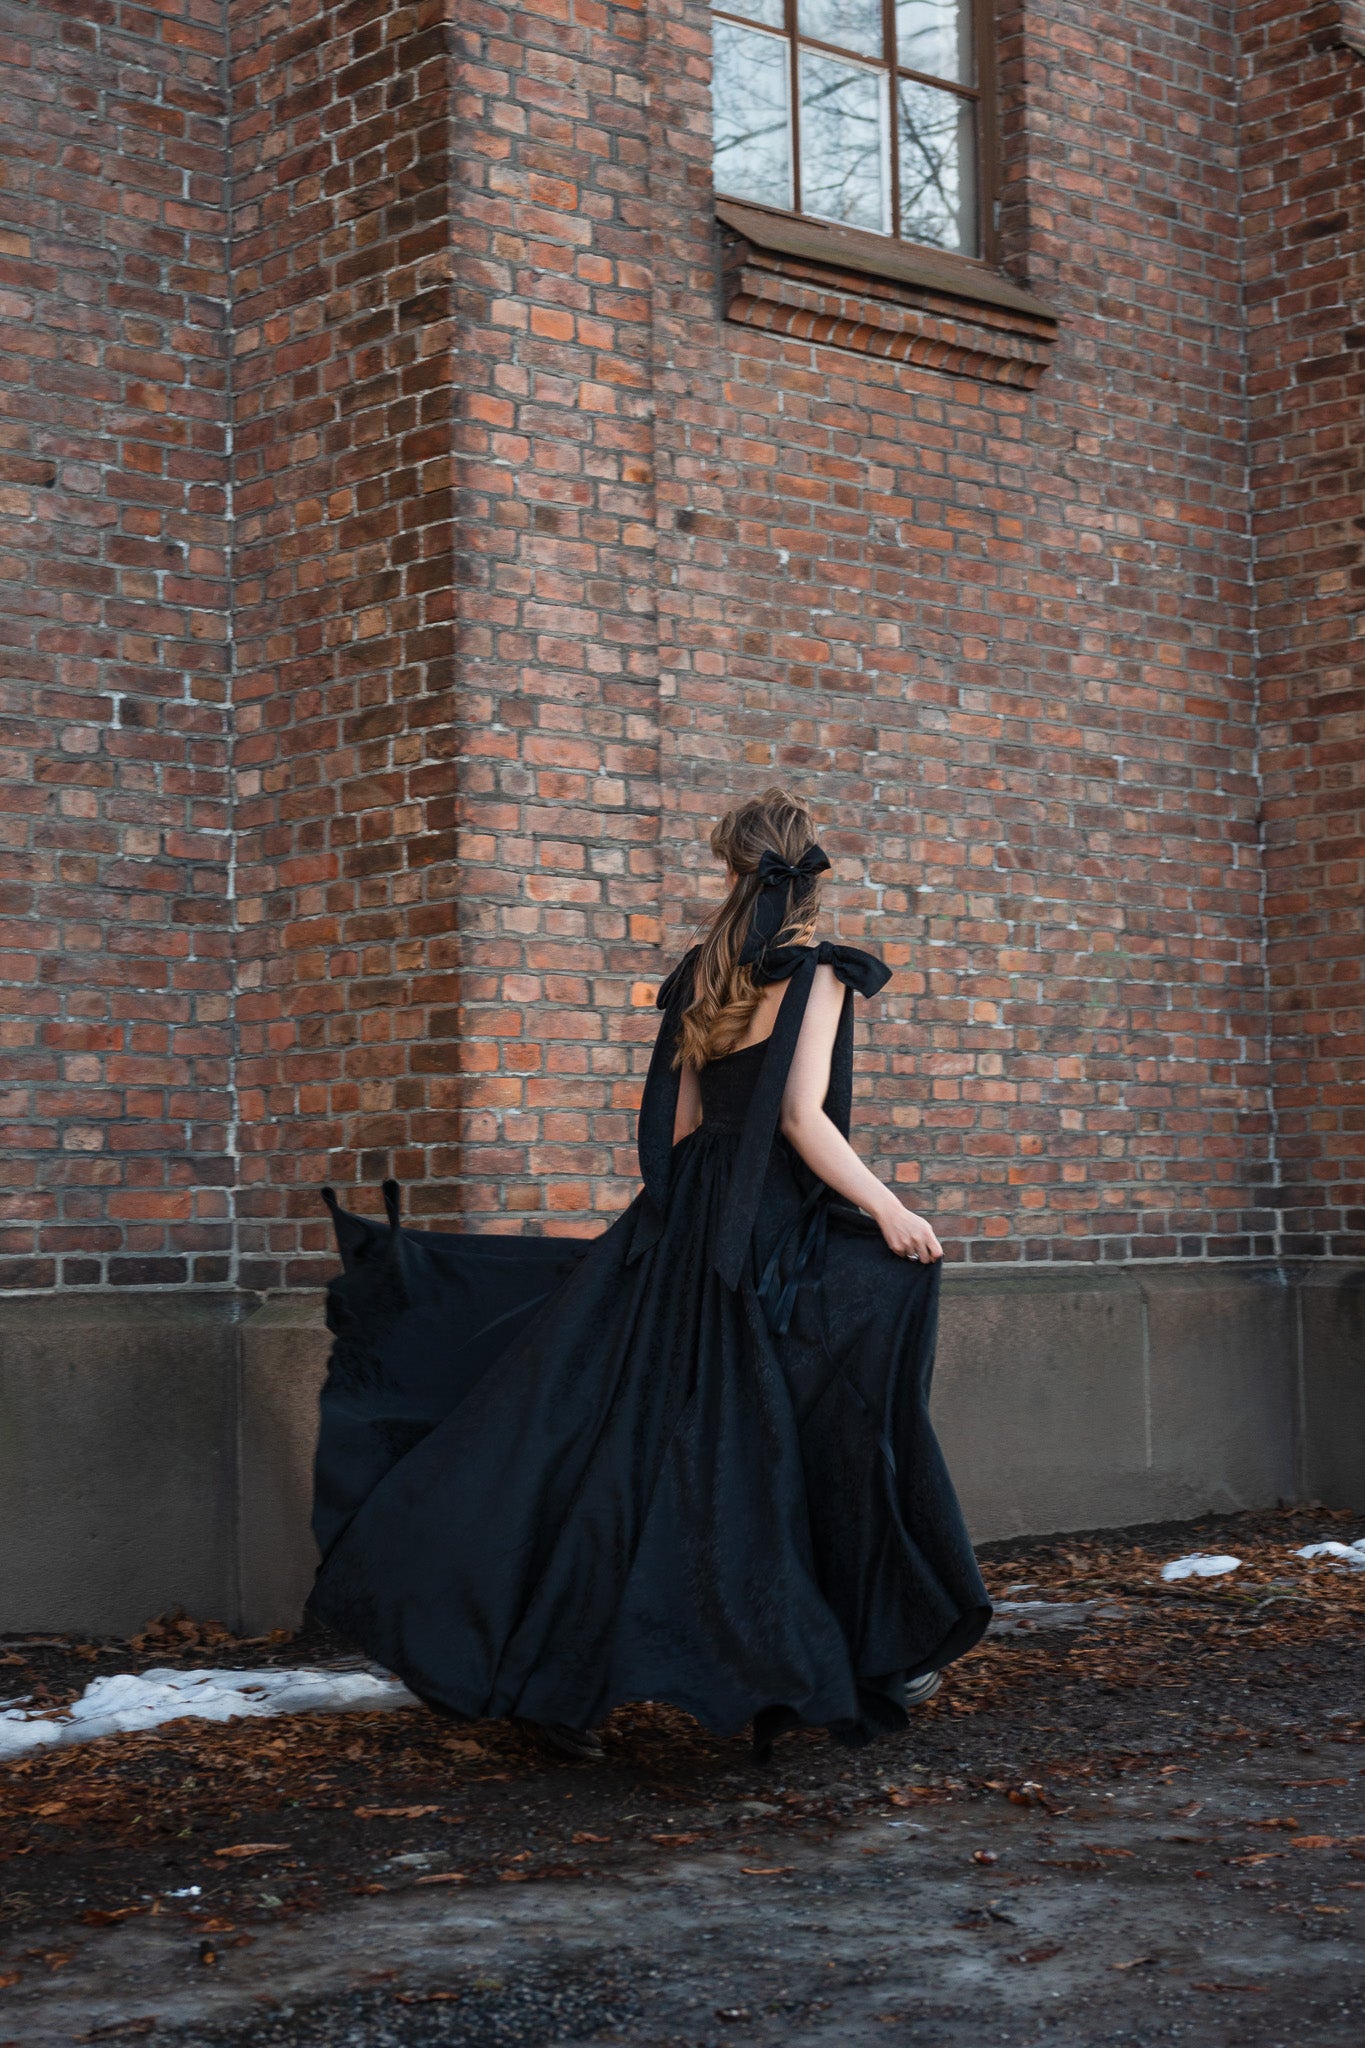 The Minerva Bow Gown